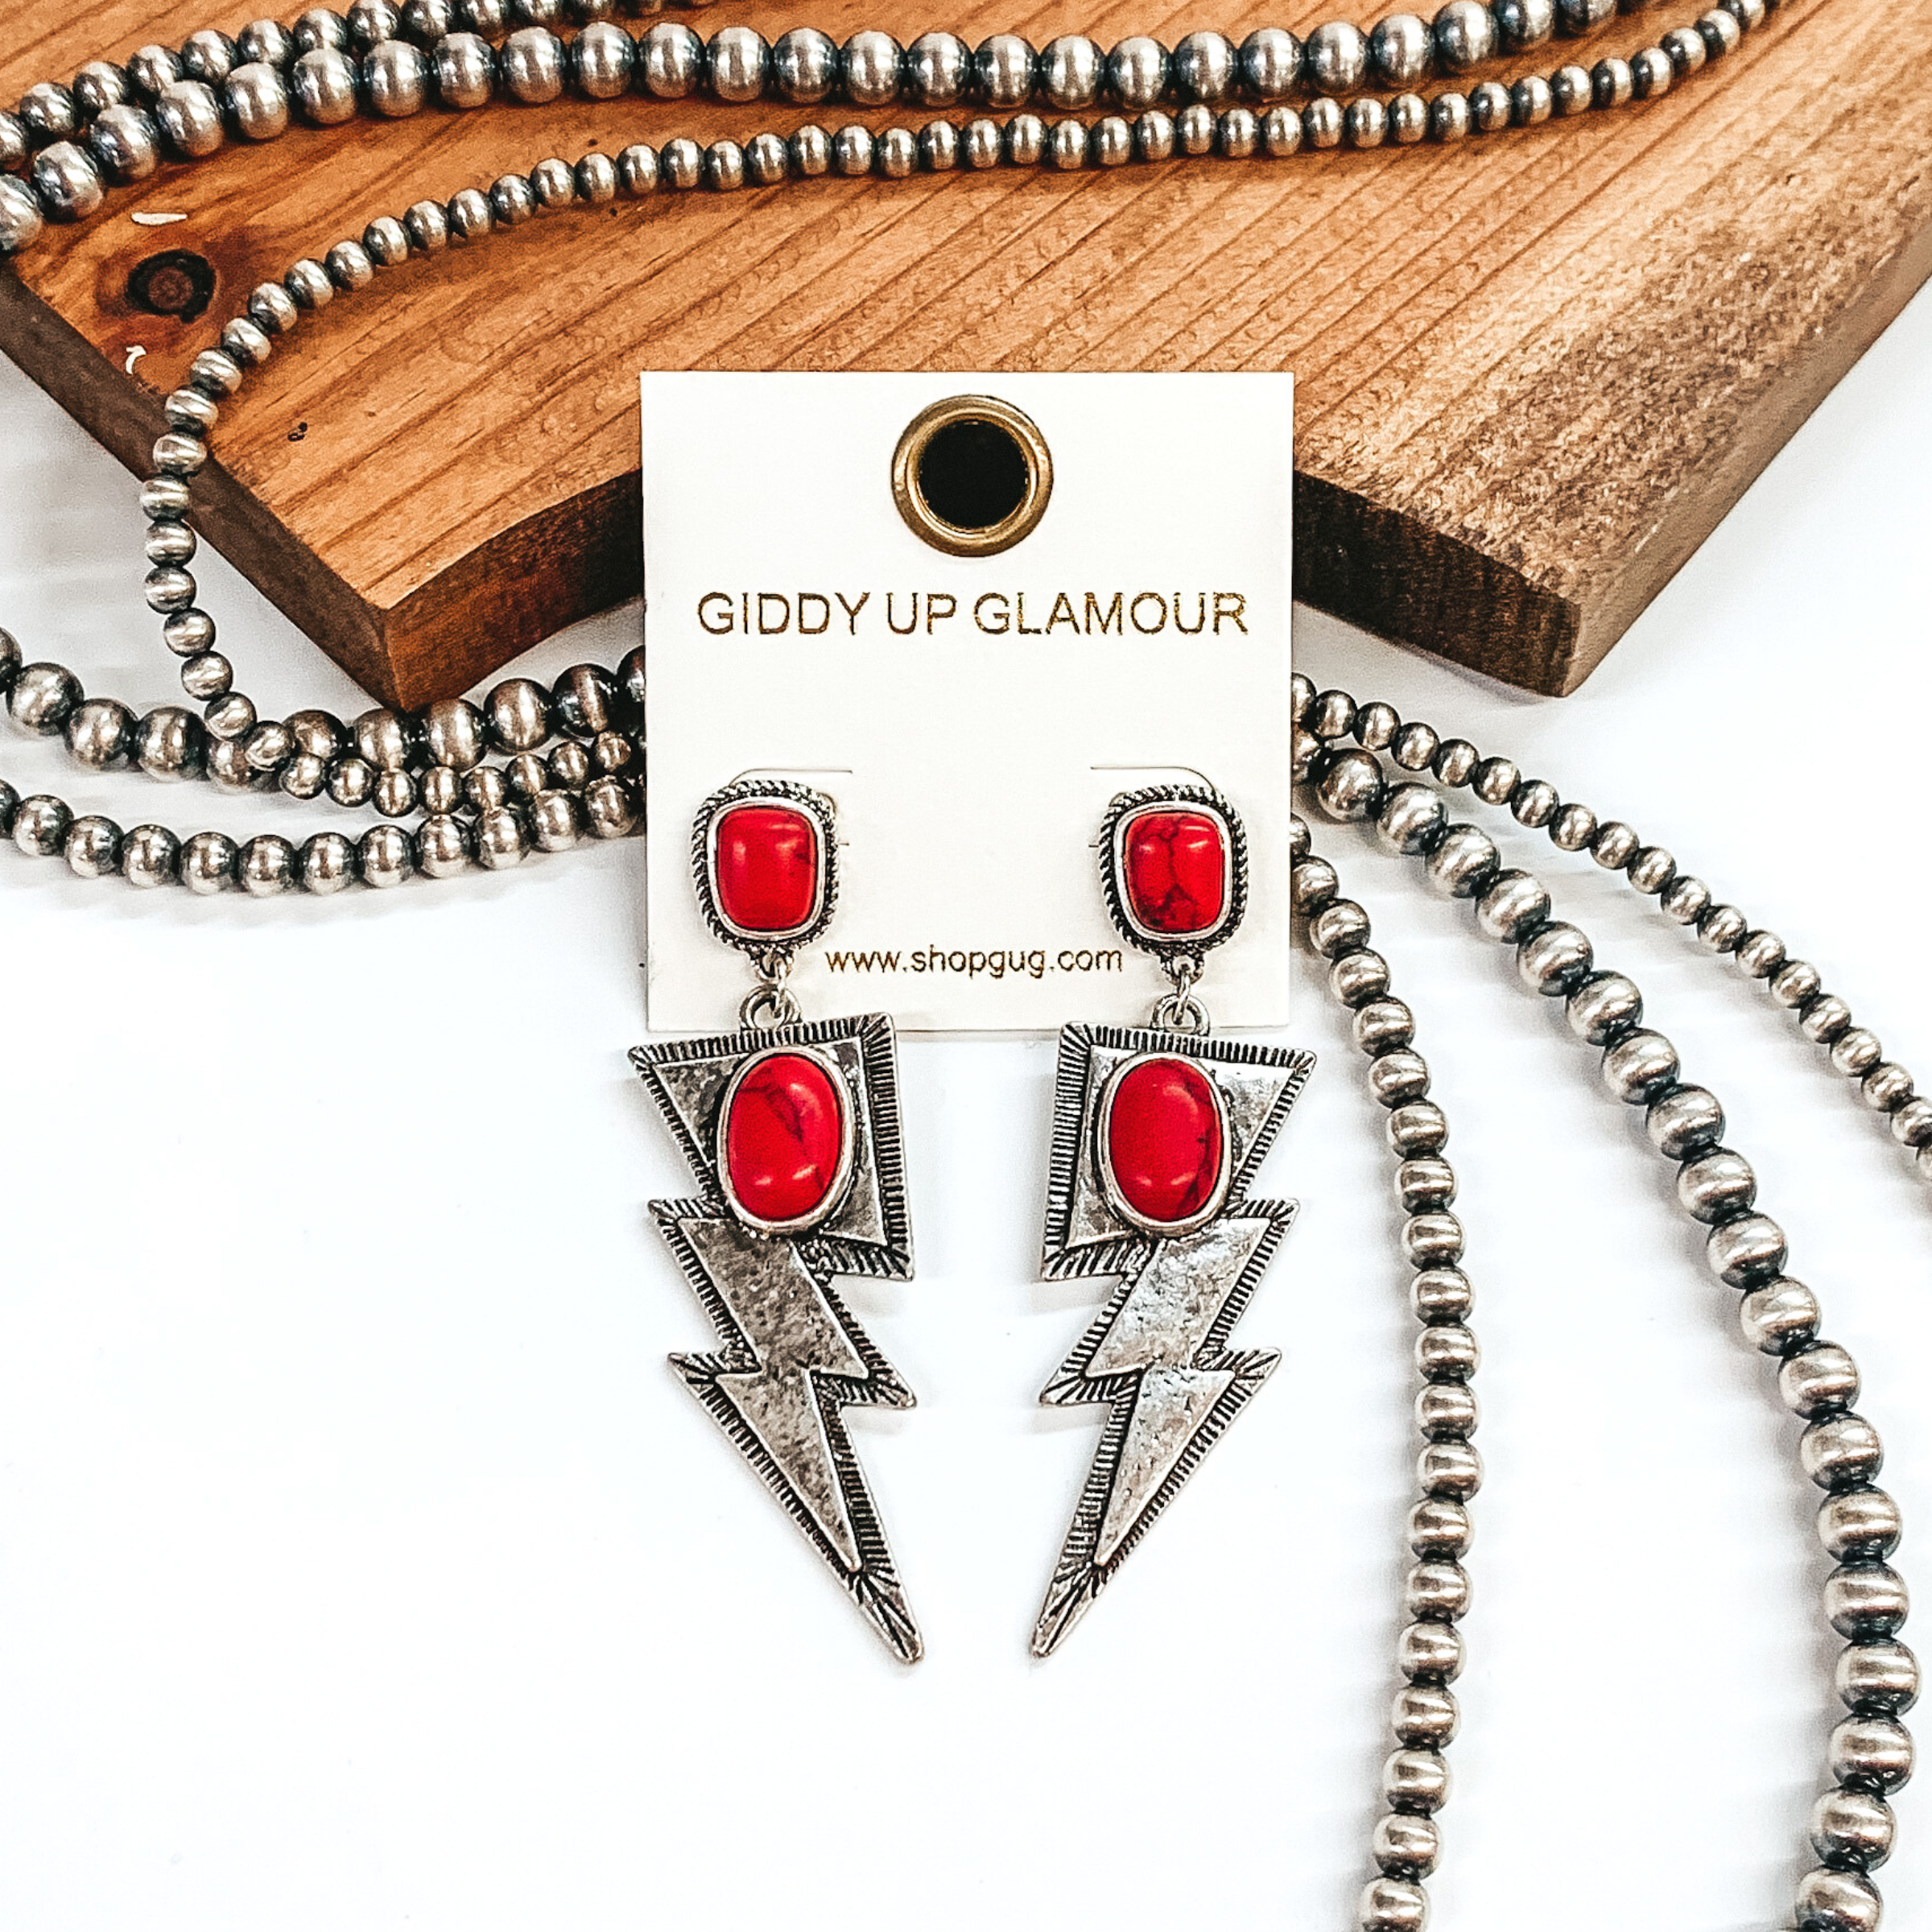 Silver irregular shaped stud earrings with a red colored stone. Hanging from the bottom there is a silver lightning bolt pendant with an oval red stone. These earrings are pictured in front of brown wood with some silver pearls laying behind the earrings. 